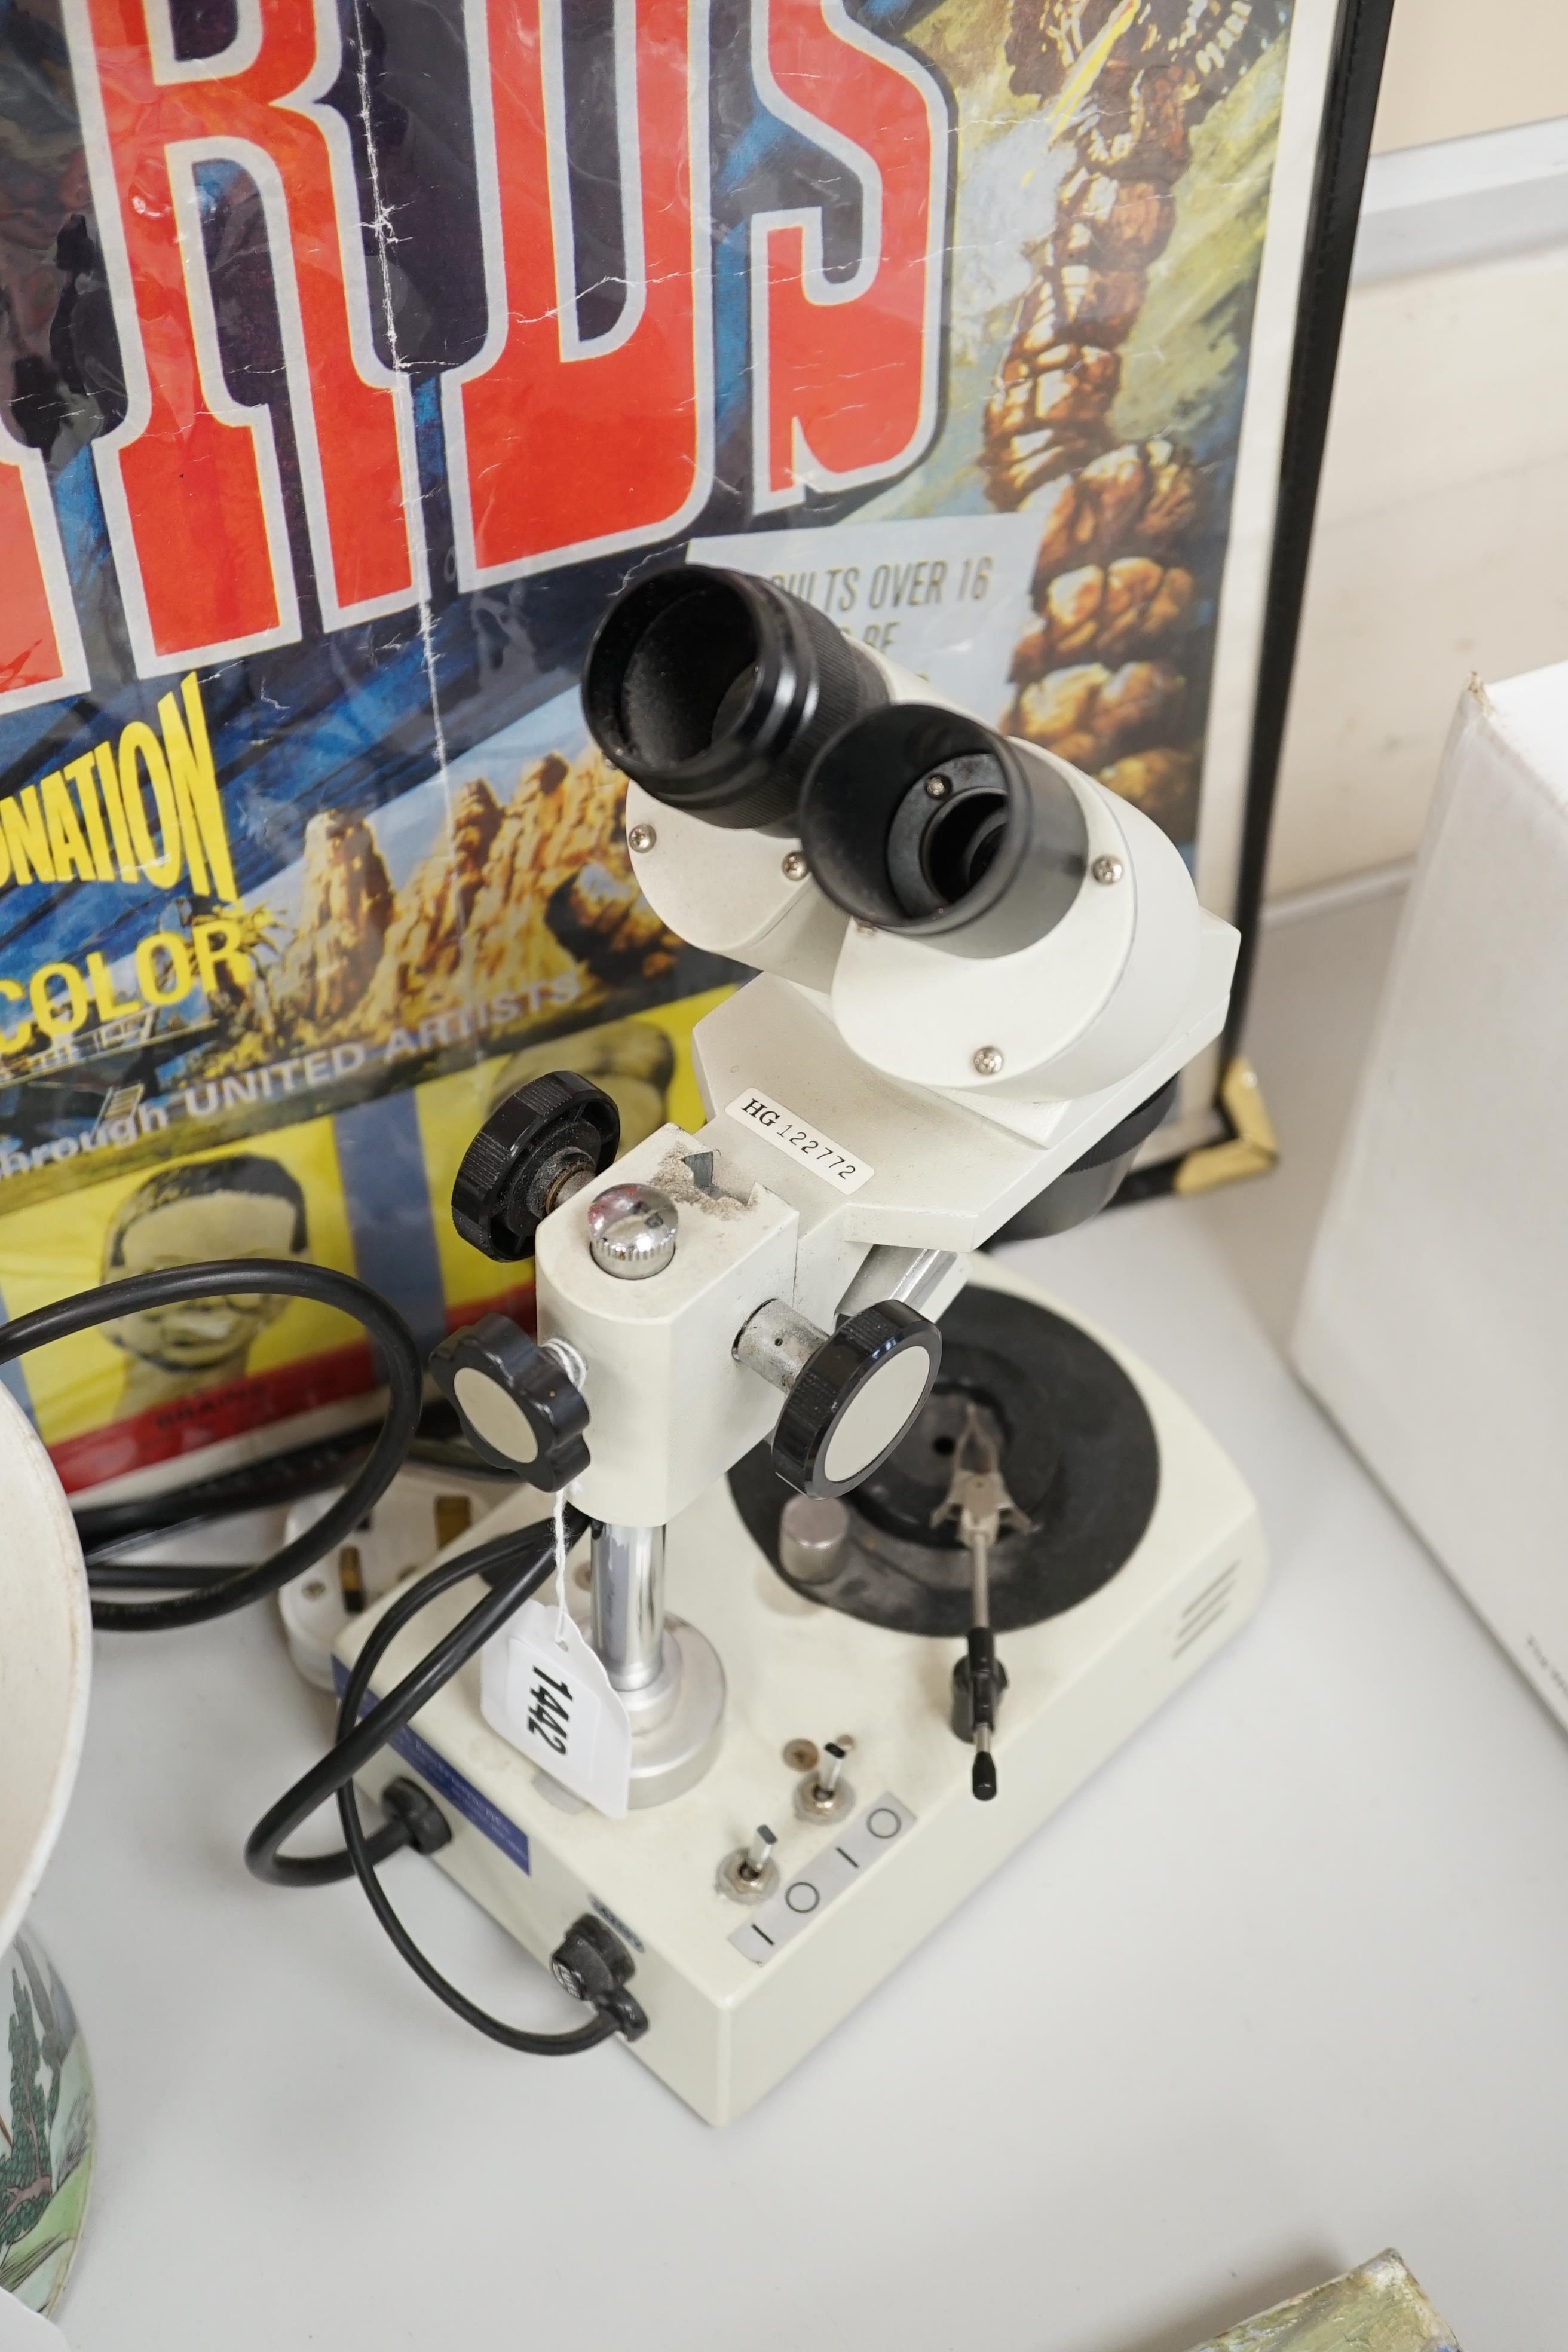 A Gem A Instruments binocular microscope, 31cm high. Condition - fair with some wear and possible parts missing.